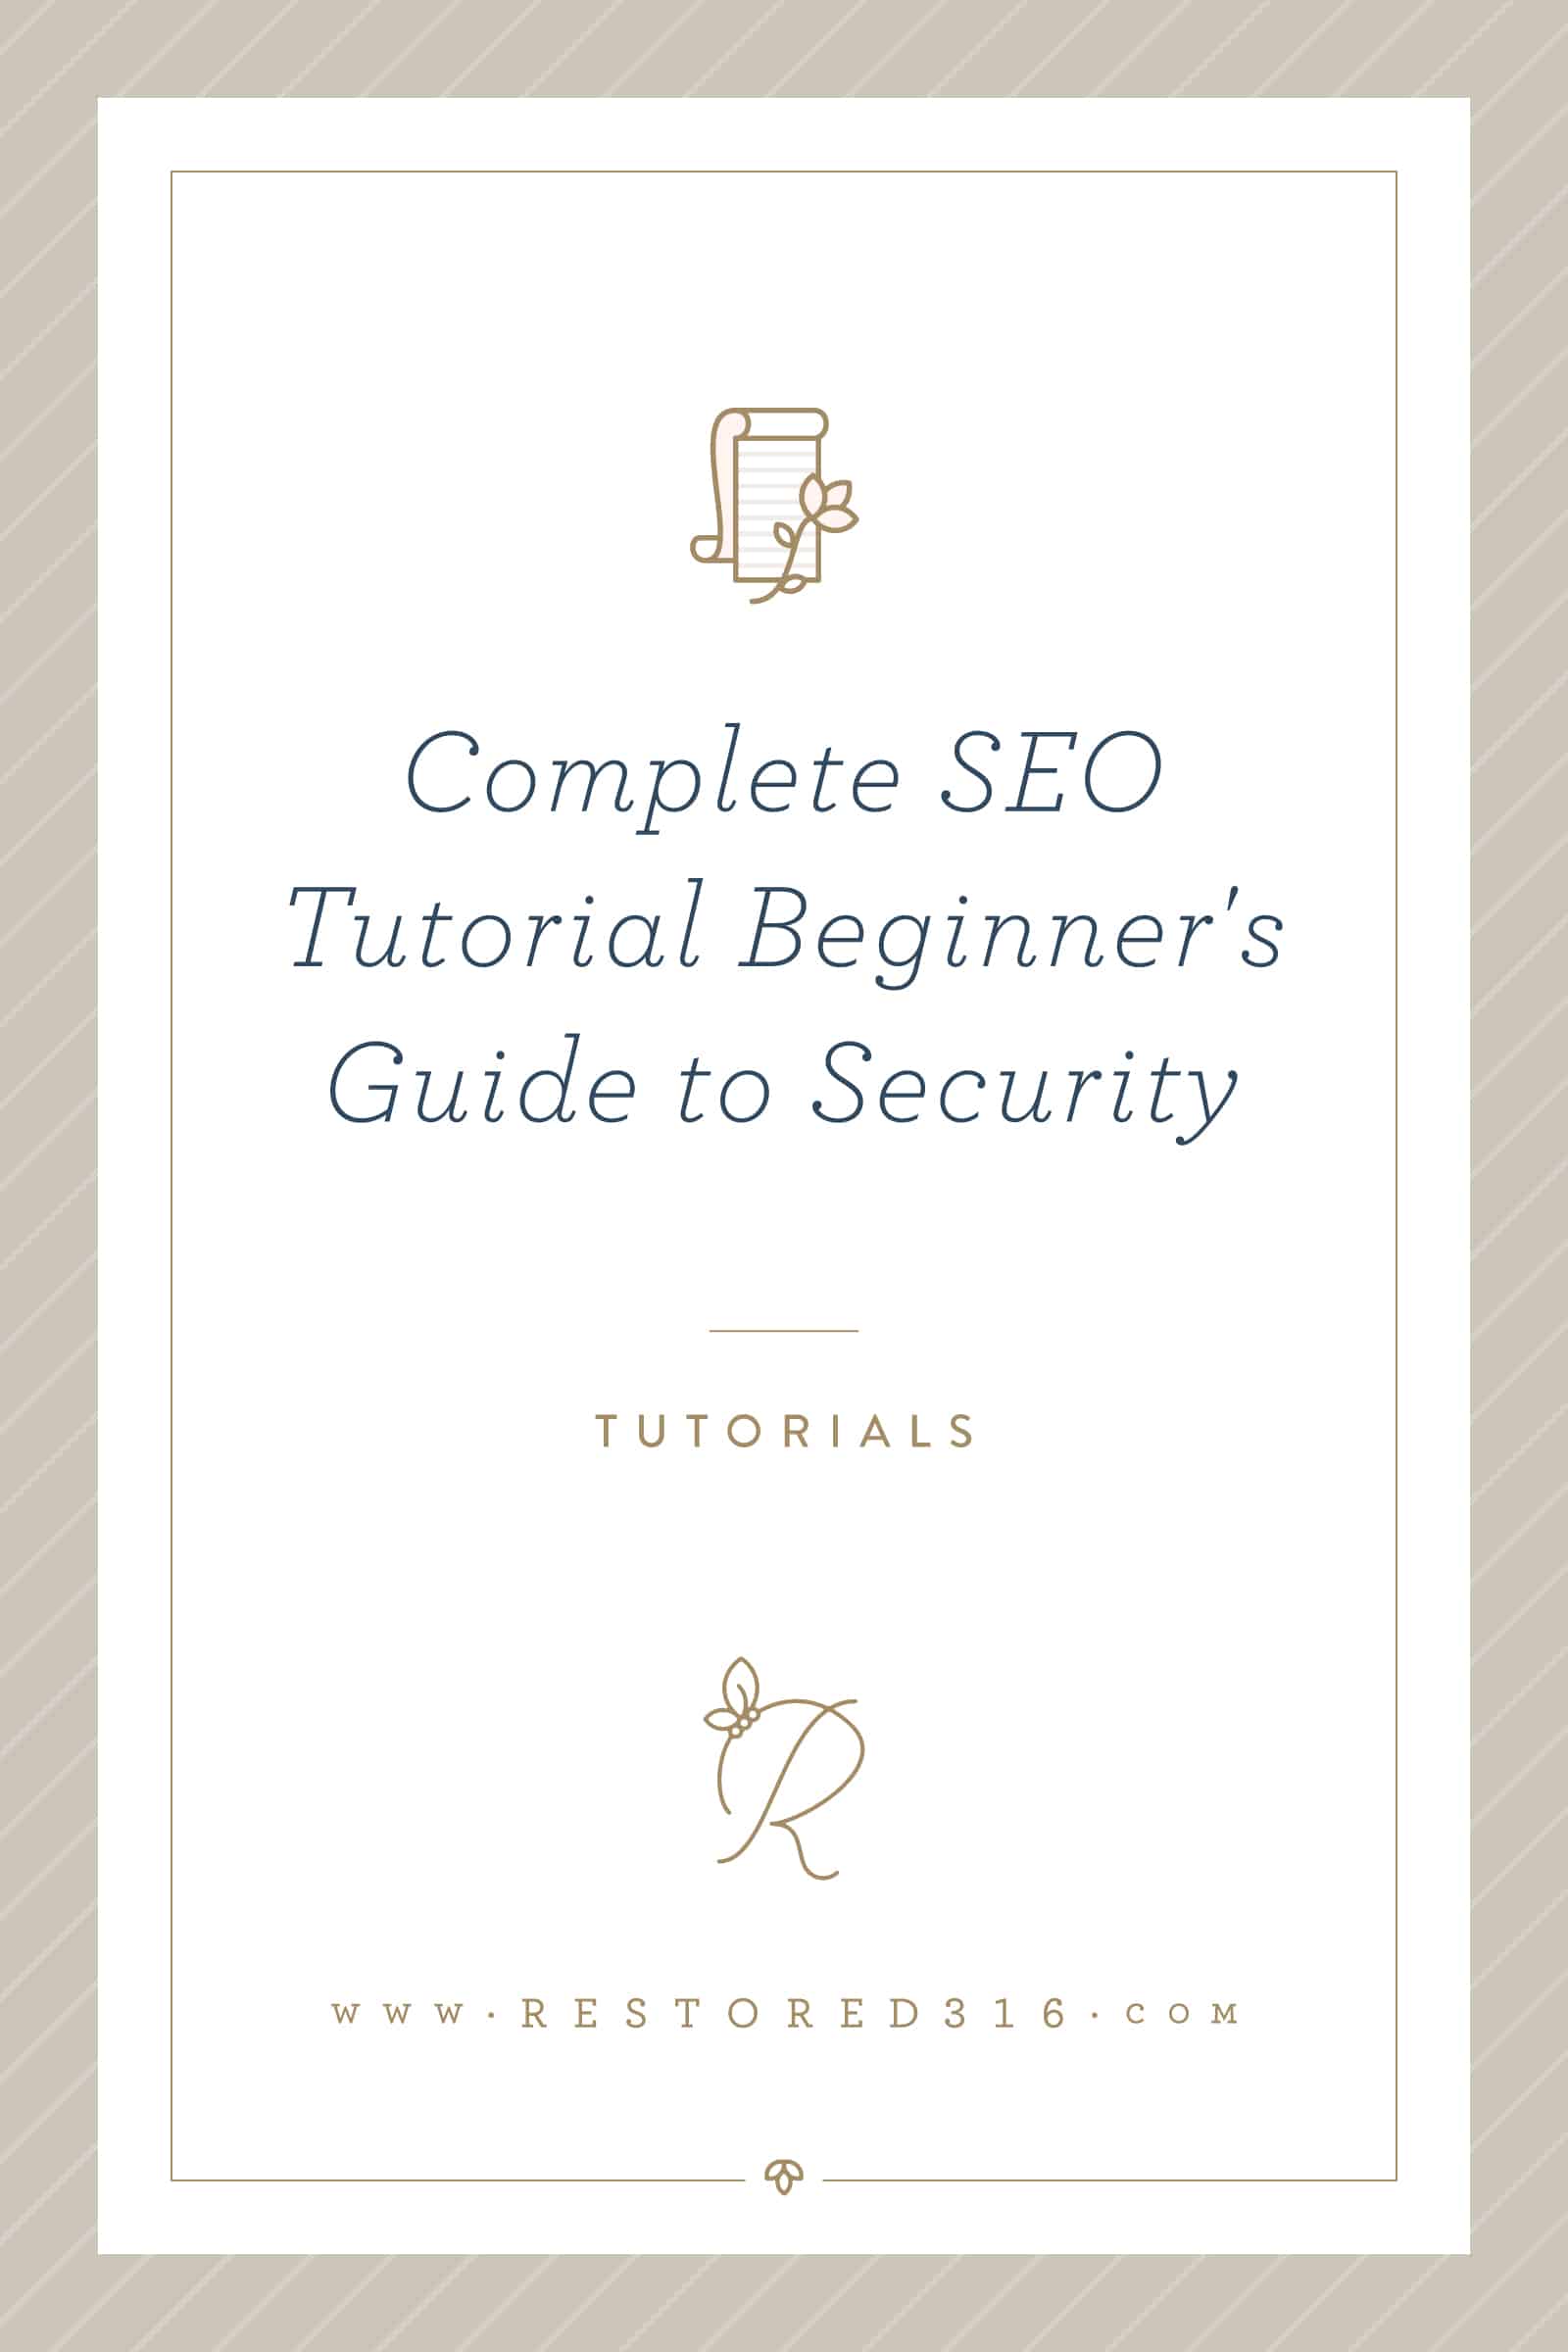 Complete SEO Tutorial Beginner's Guide to Security